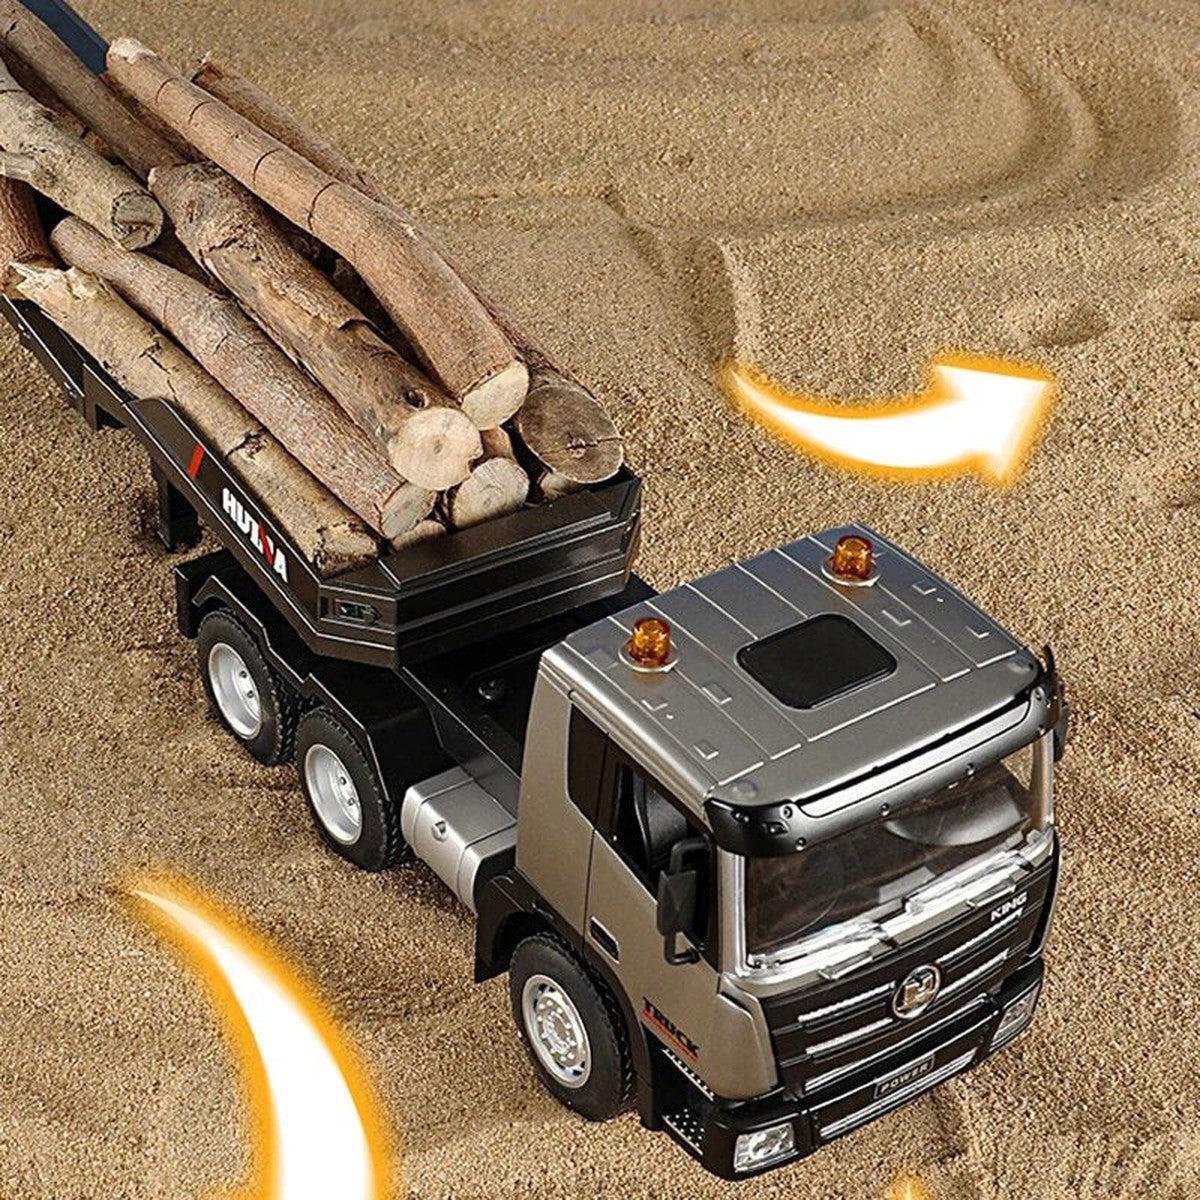 Mercedes Rc Truck and Trailer 1:24 Scale